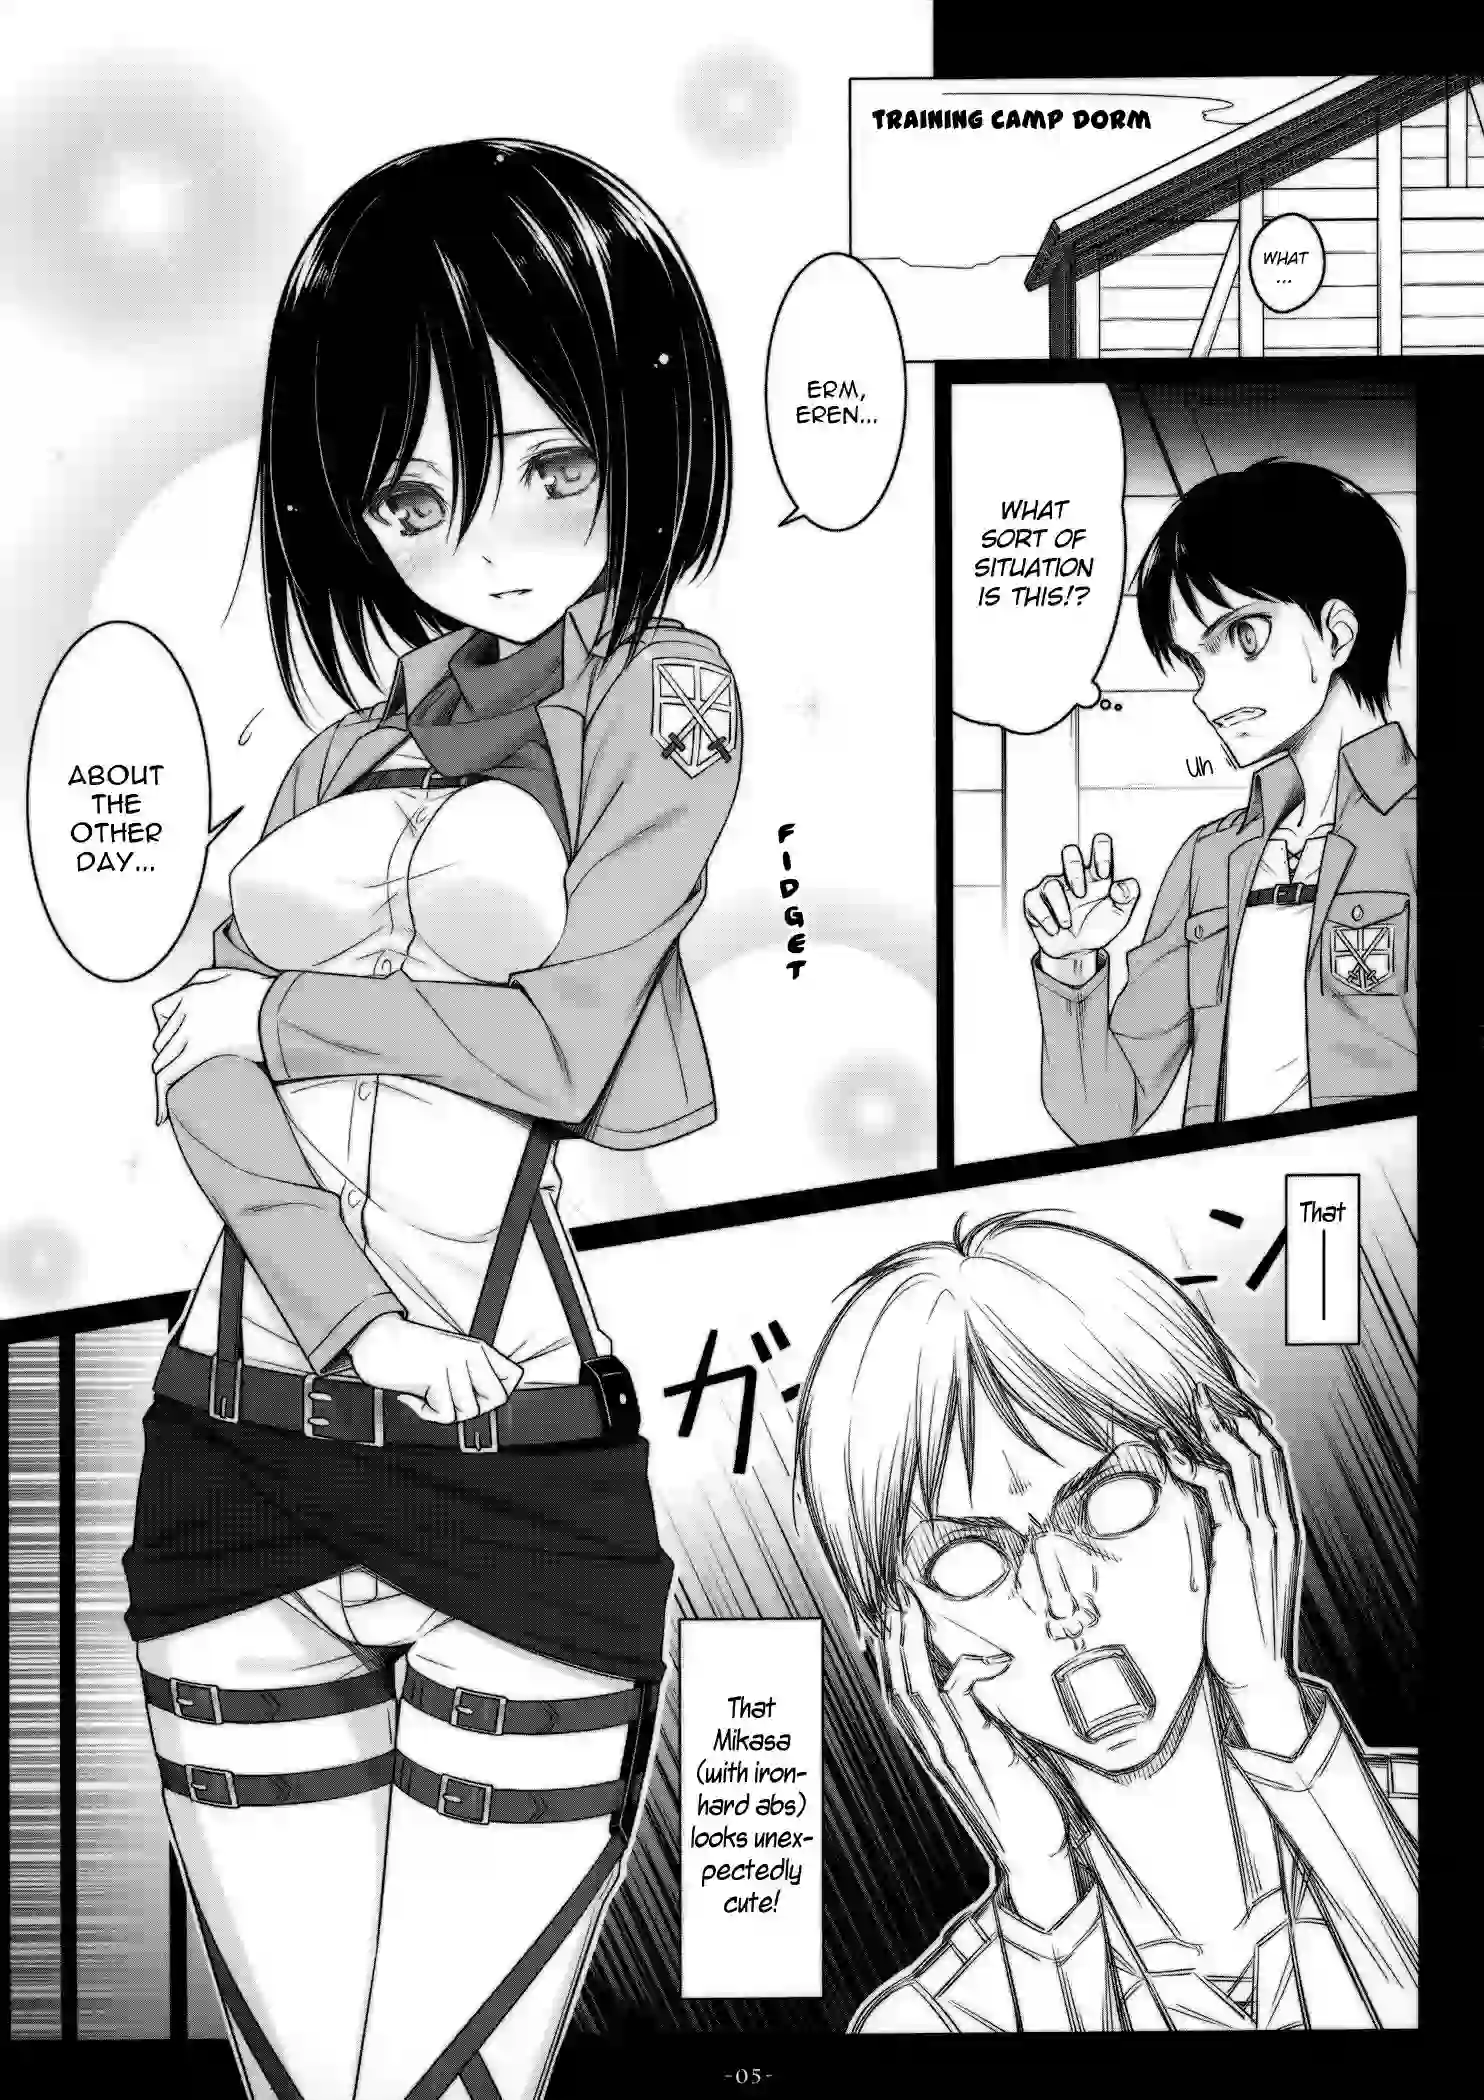 Mikasa ackerman Hentai - Naked on all fours getting fucked by Eren